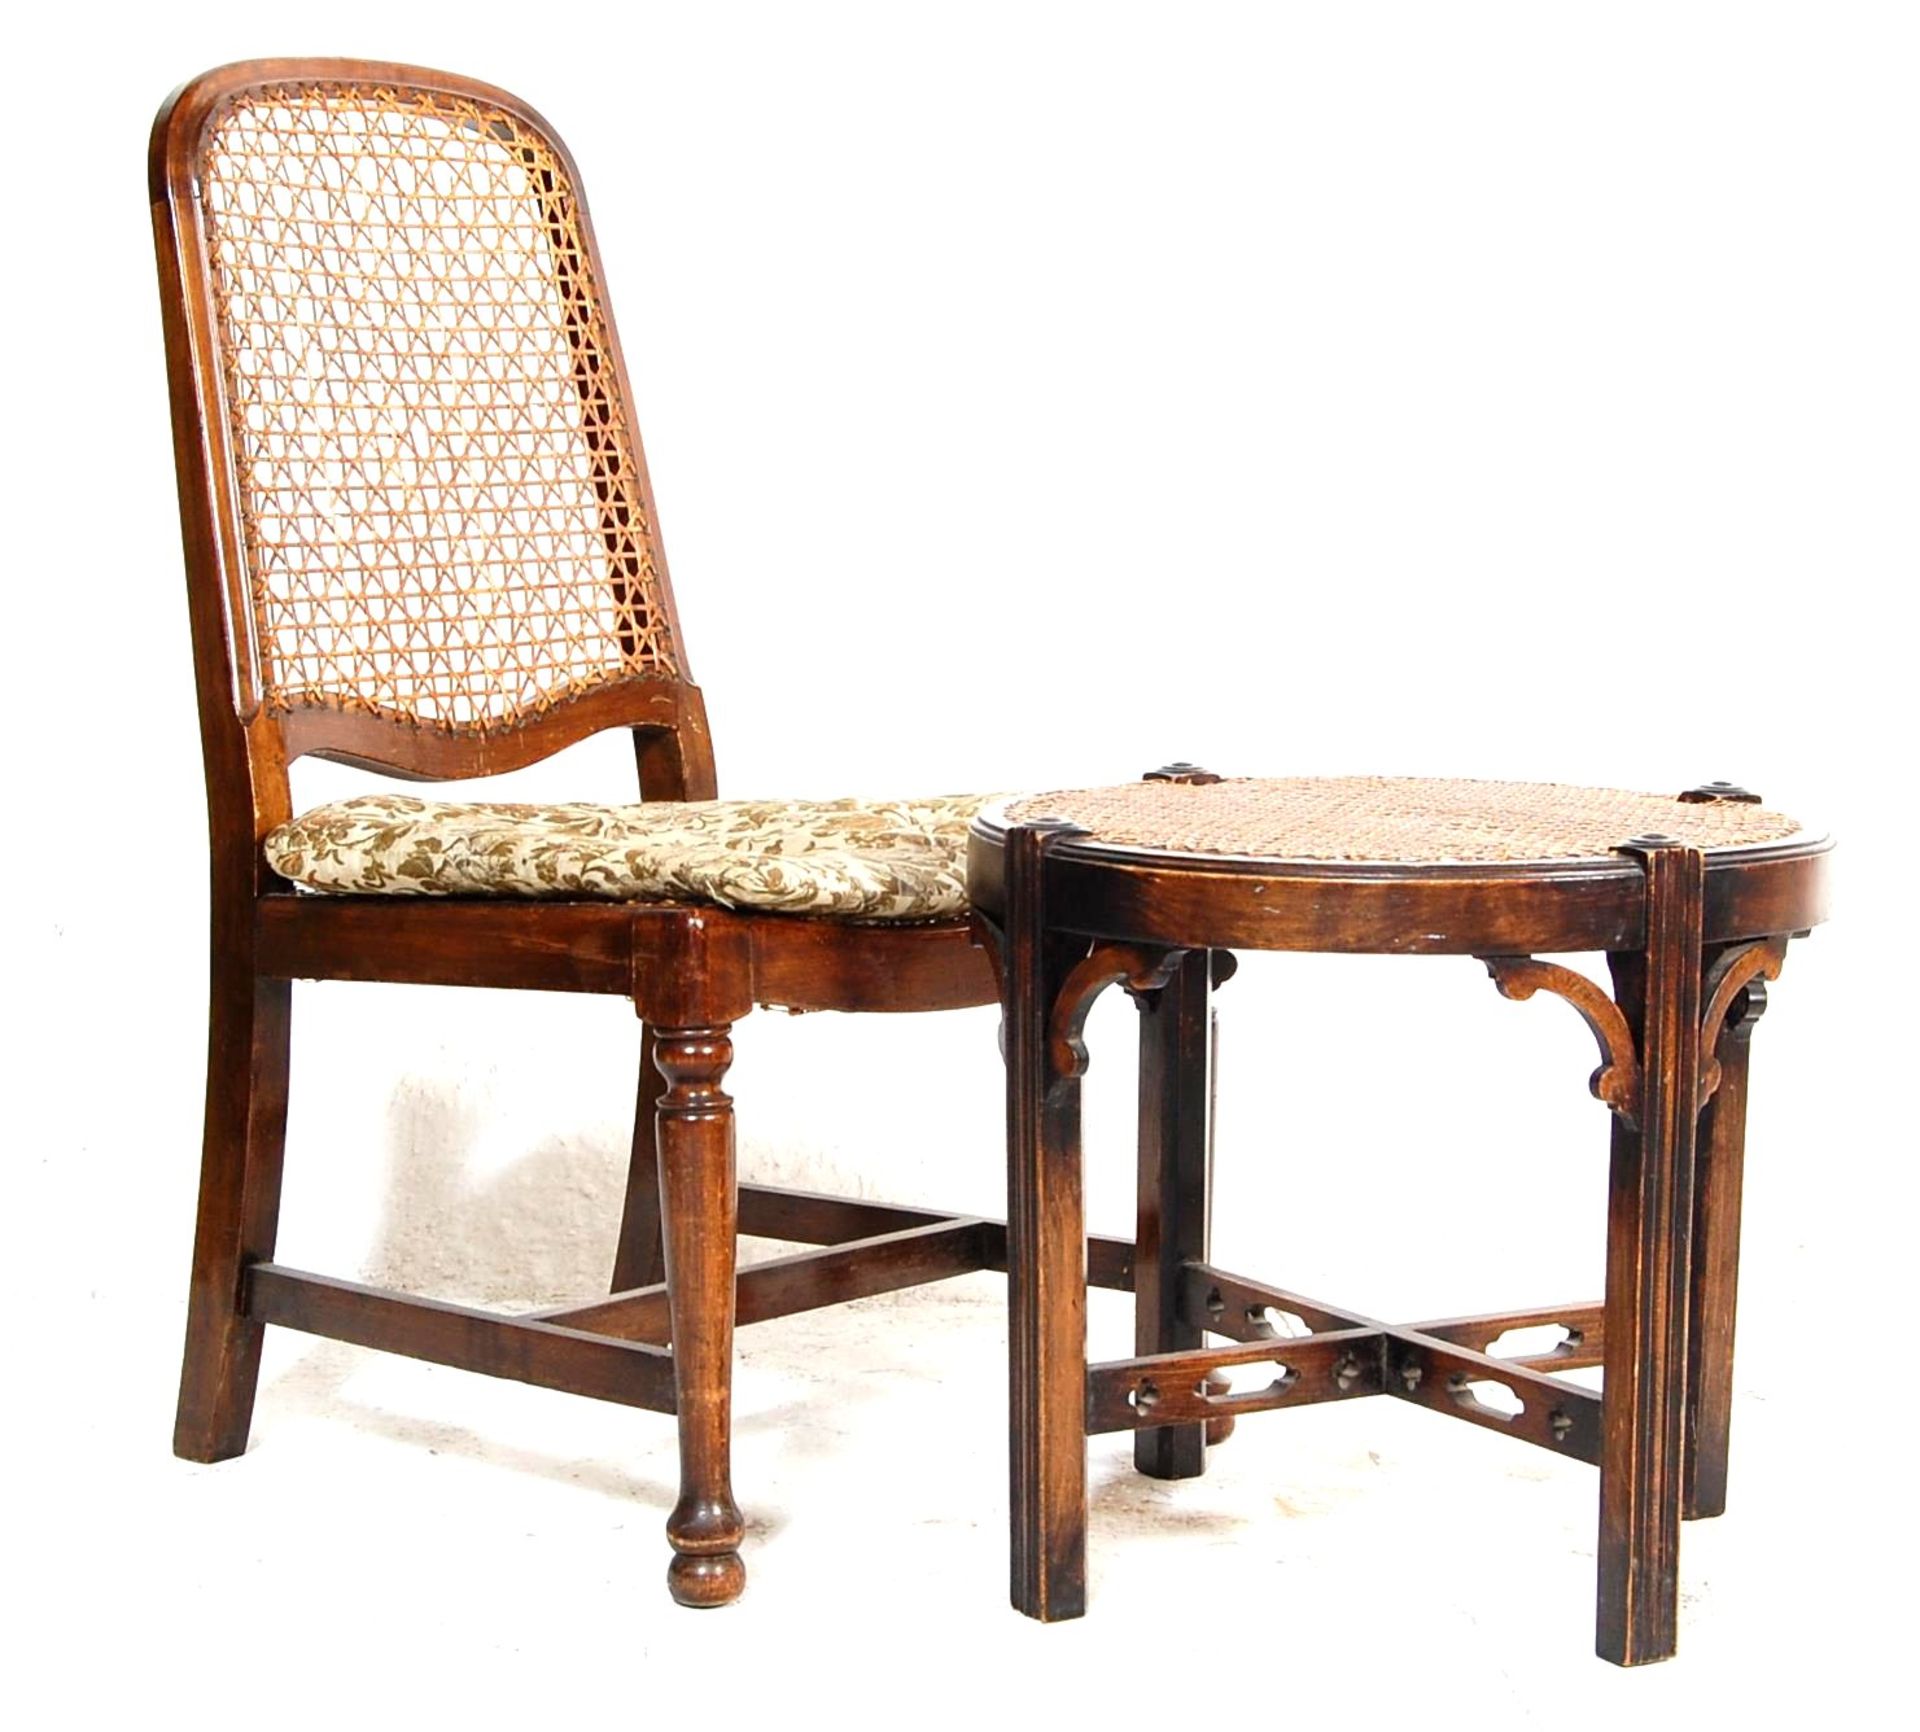 AN EARLY 20TH CENTURY ANTIQUE OAK FIRESIDE CHAIR AND FOOTSTOOL